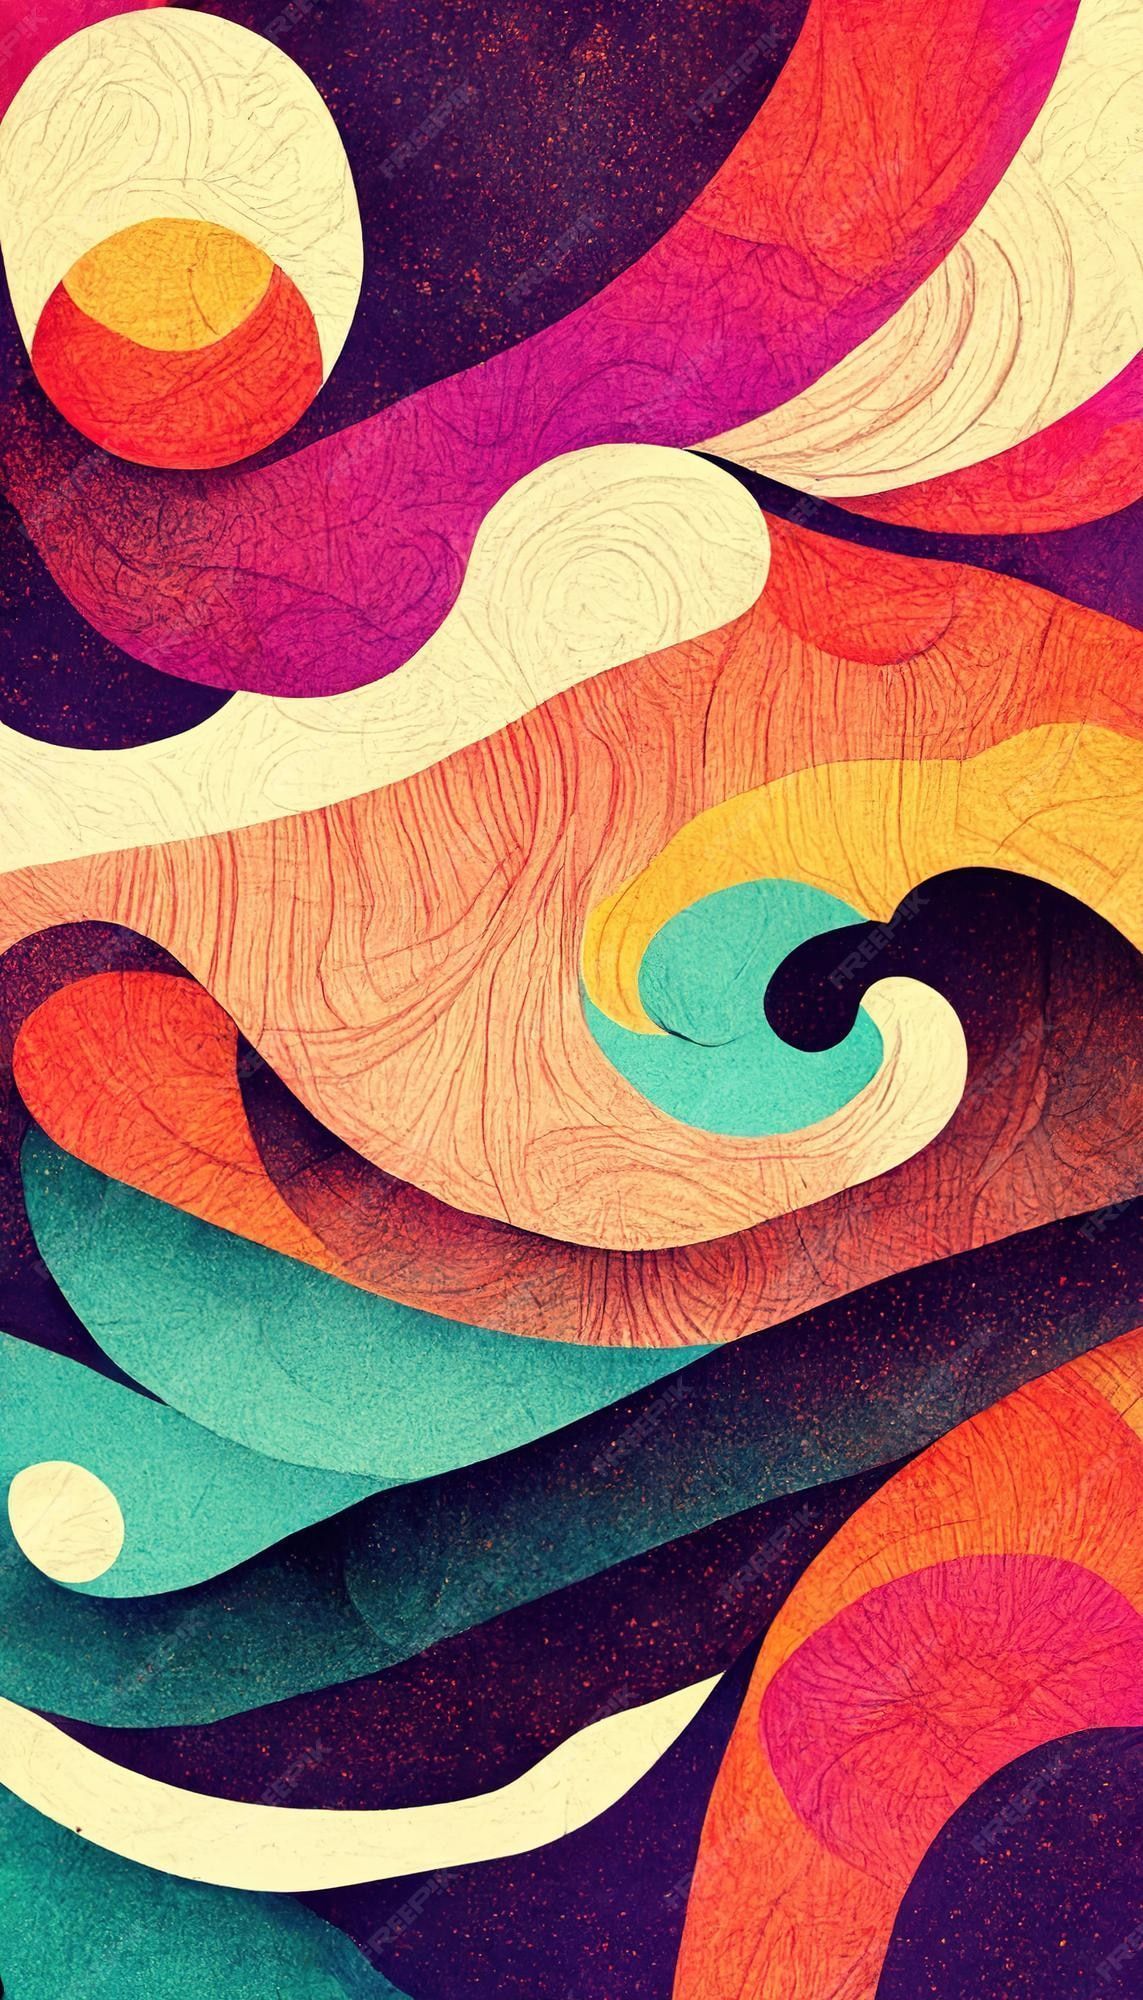 A colorful abstract art with curves - Psychedelic